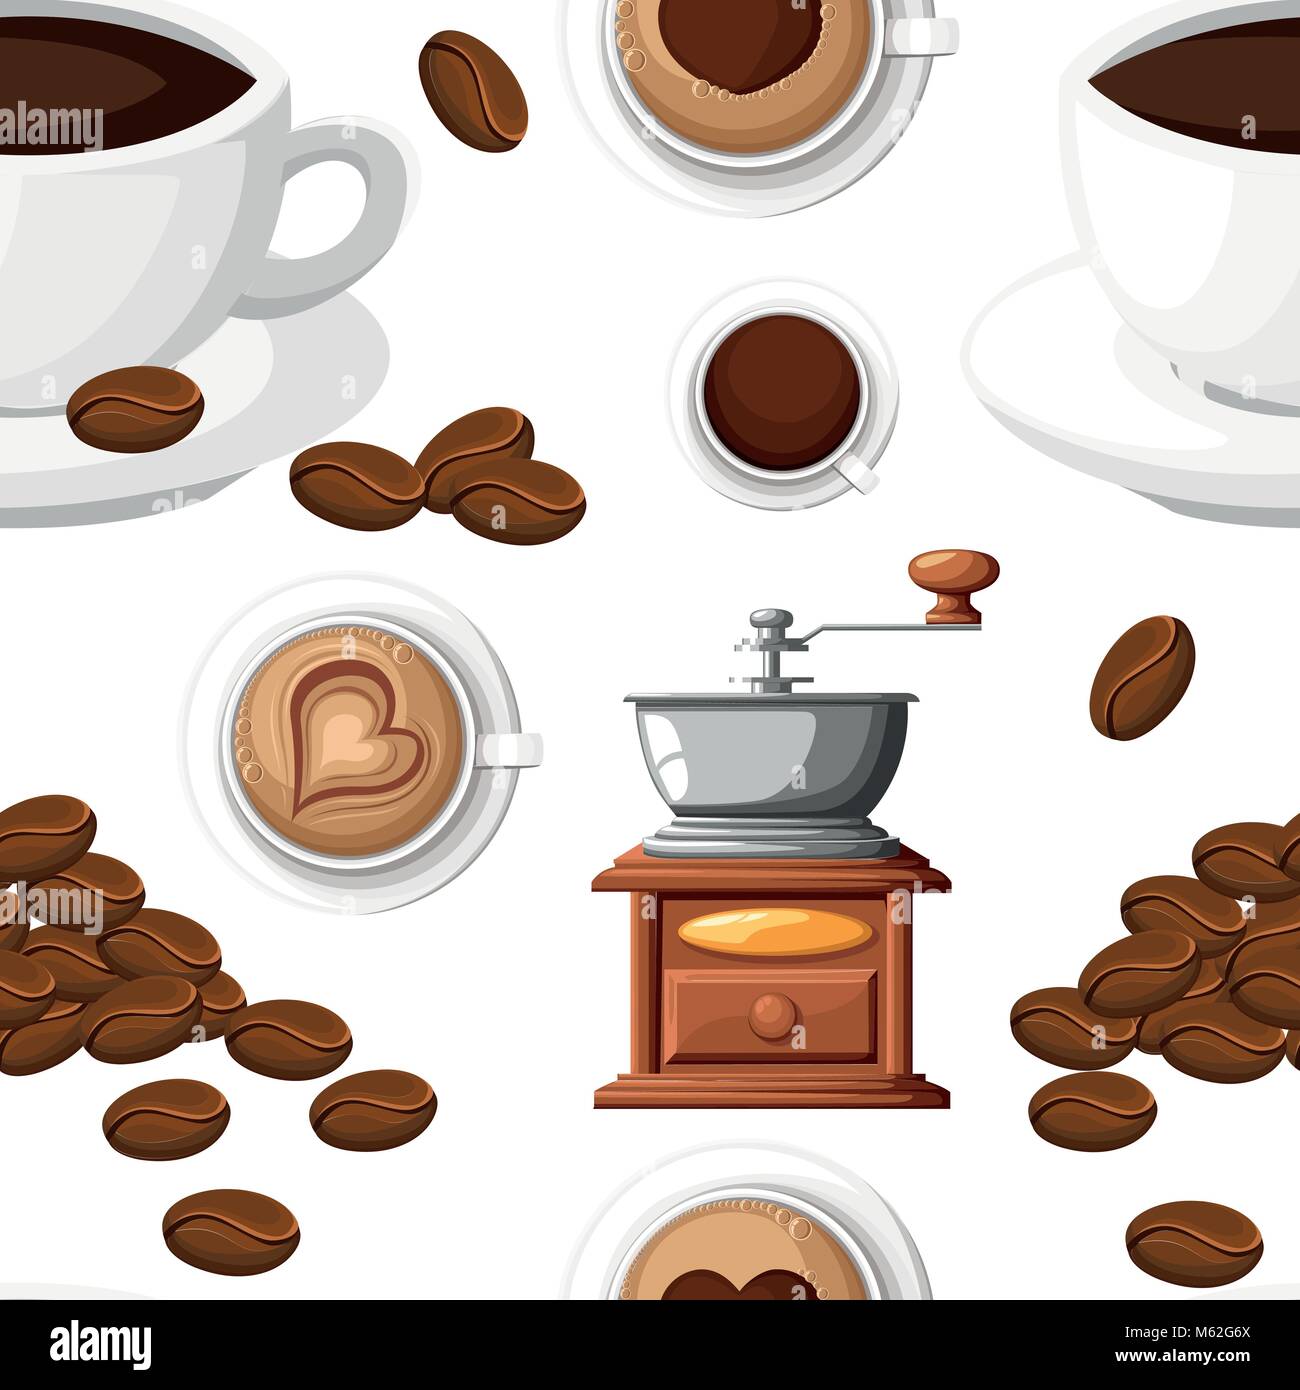 https://c8.alamy.com/comp/M62G6X/seamless-pattern-of-classic-coffee-grinder-with-a-bunch-of-coffee-M62G6X.jpg